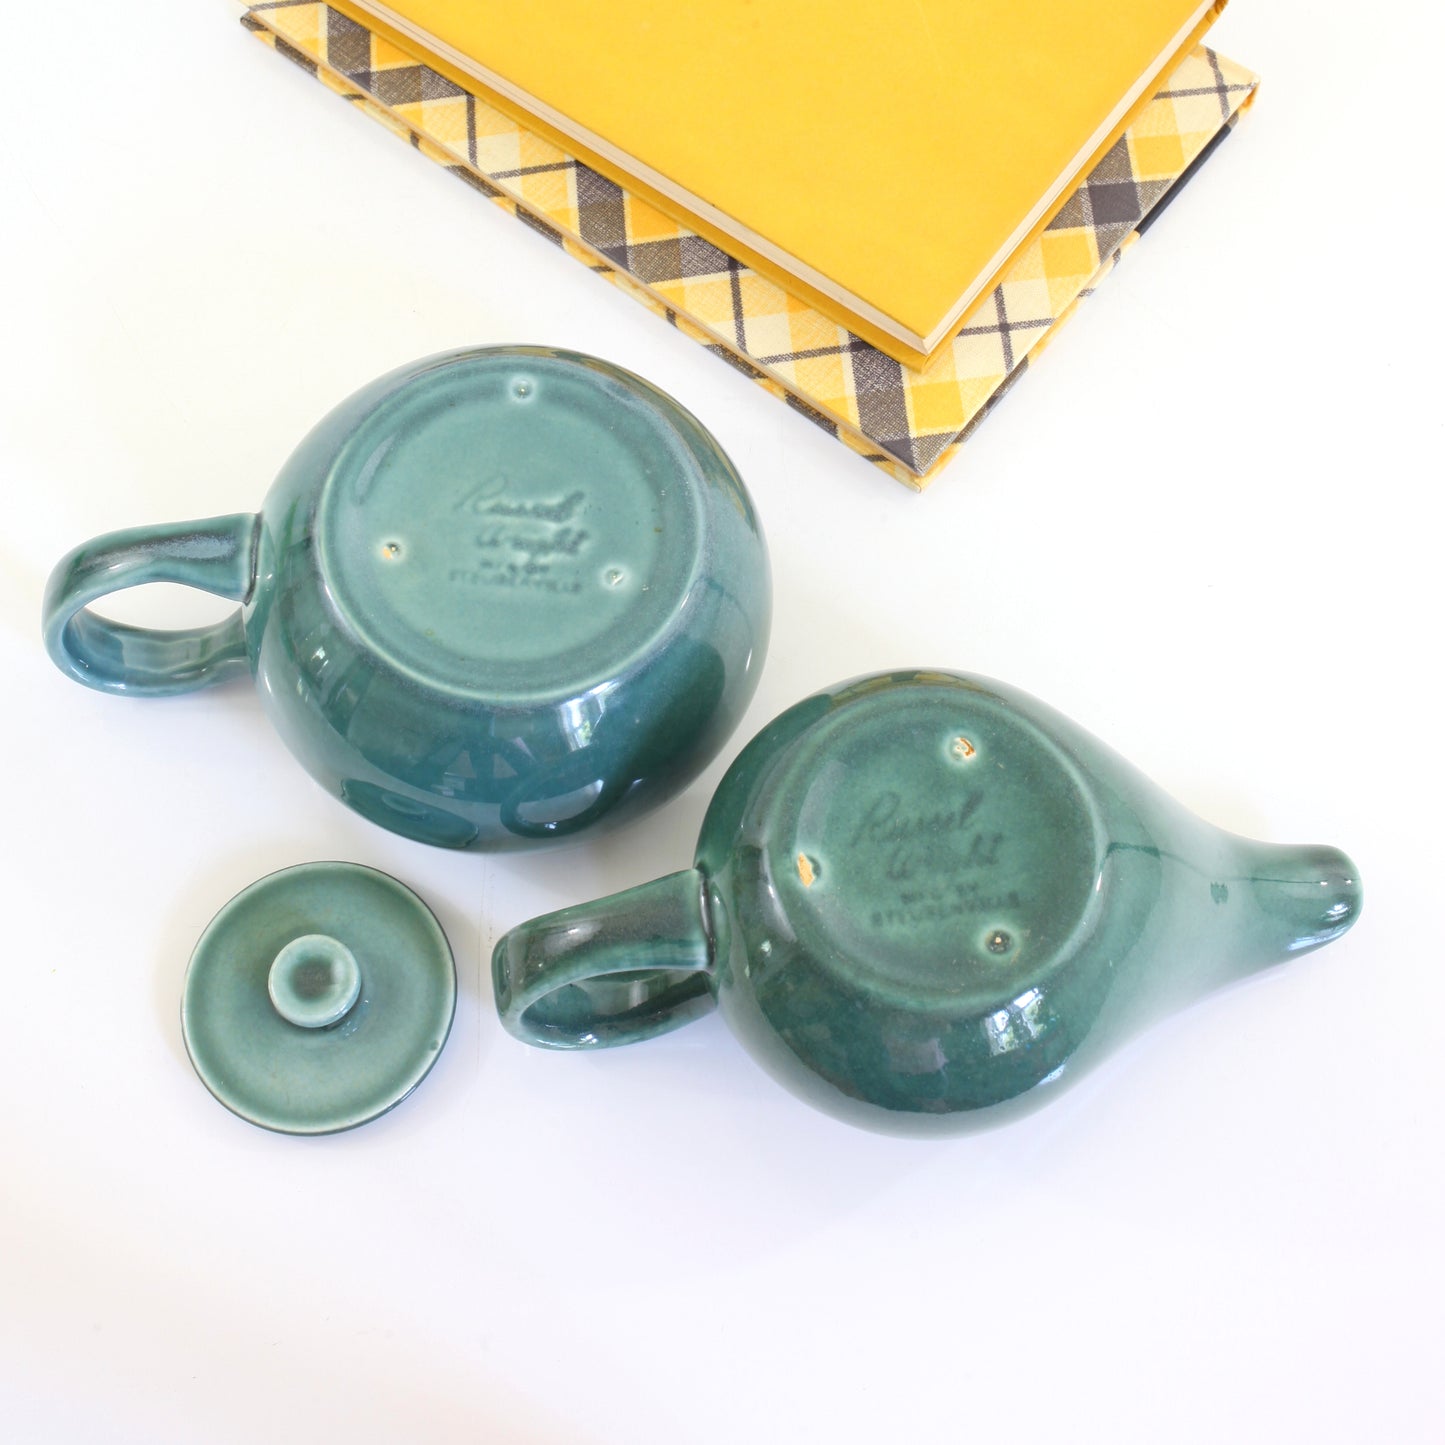 SOLD - Mid Century American Modern Seafoam Cream & Sugar Set by Russel Wright for Steubenville